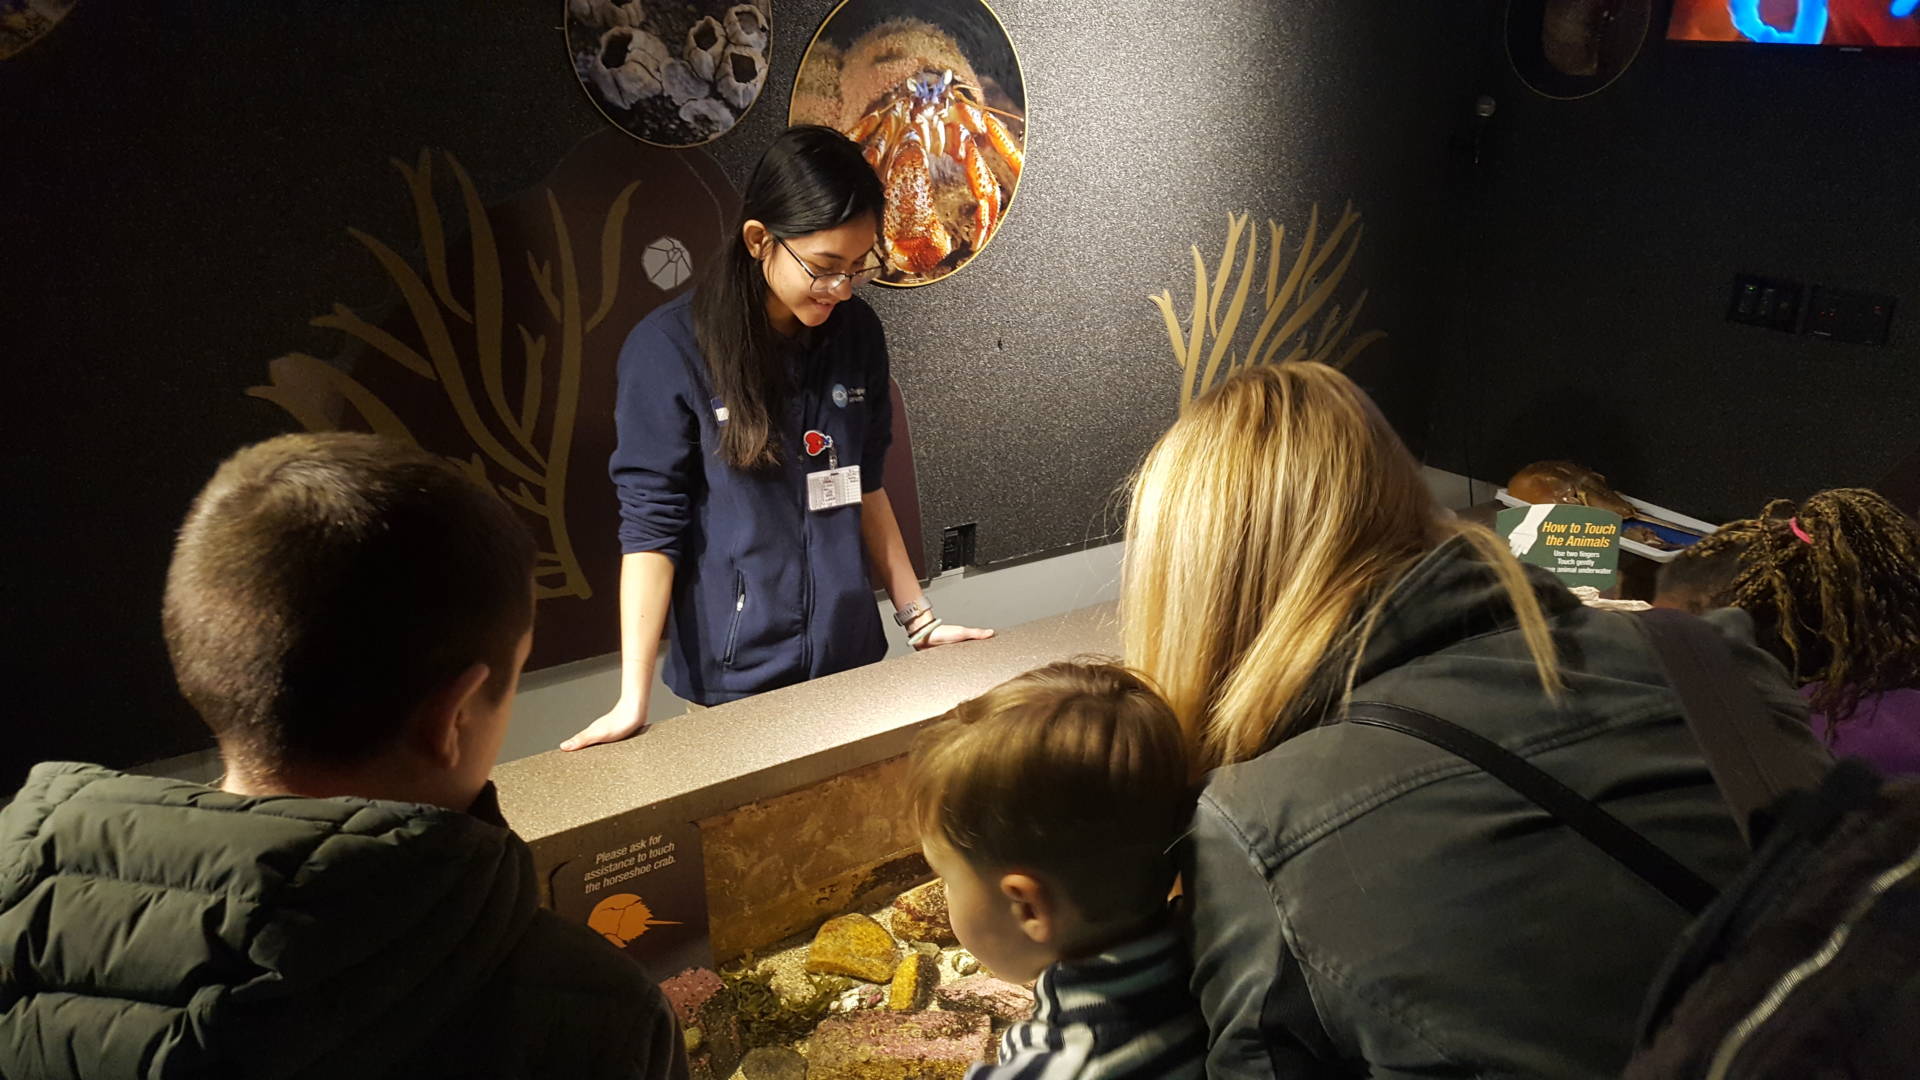 Destiny Reyes, 18, spends one school day each week at the New England Aquarium and much of her schoolwork is built around research opportunities there.